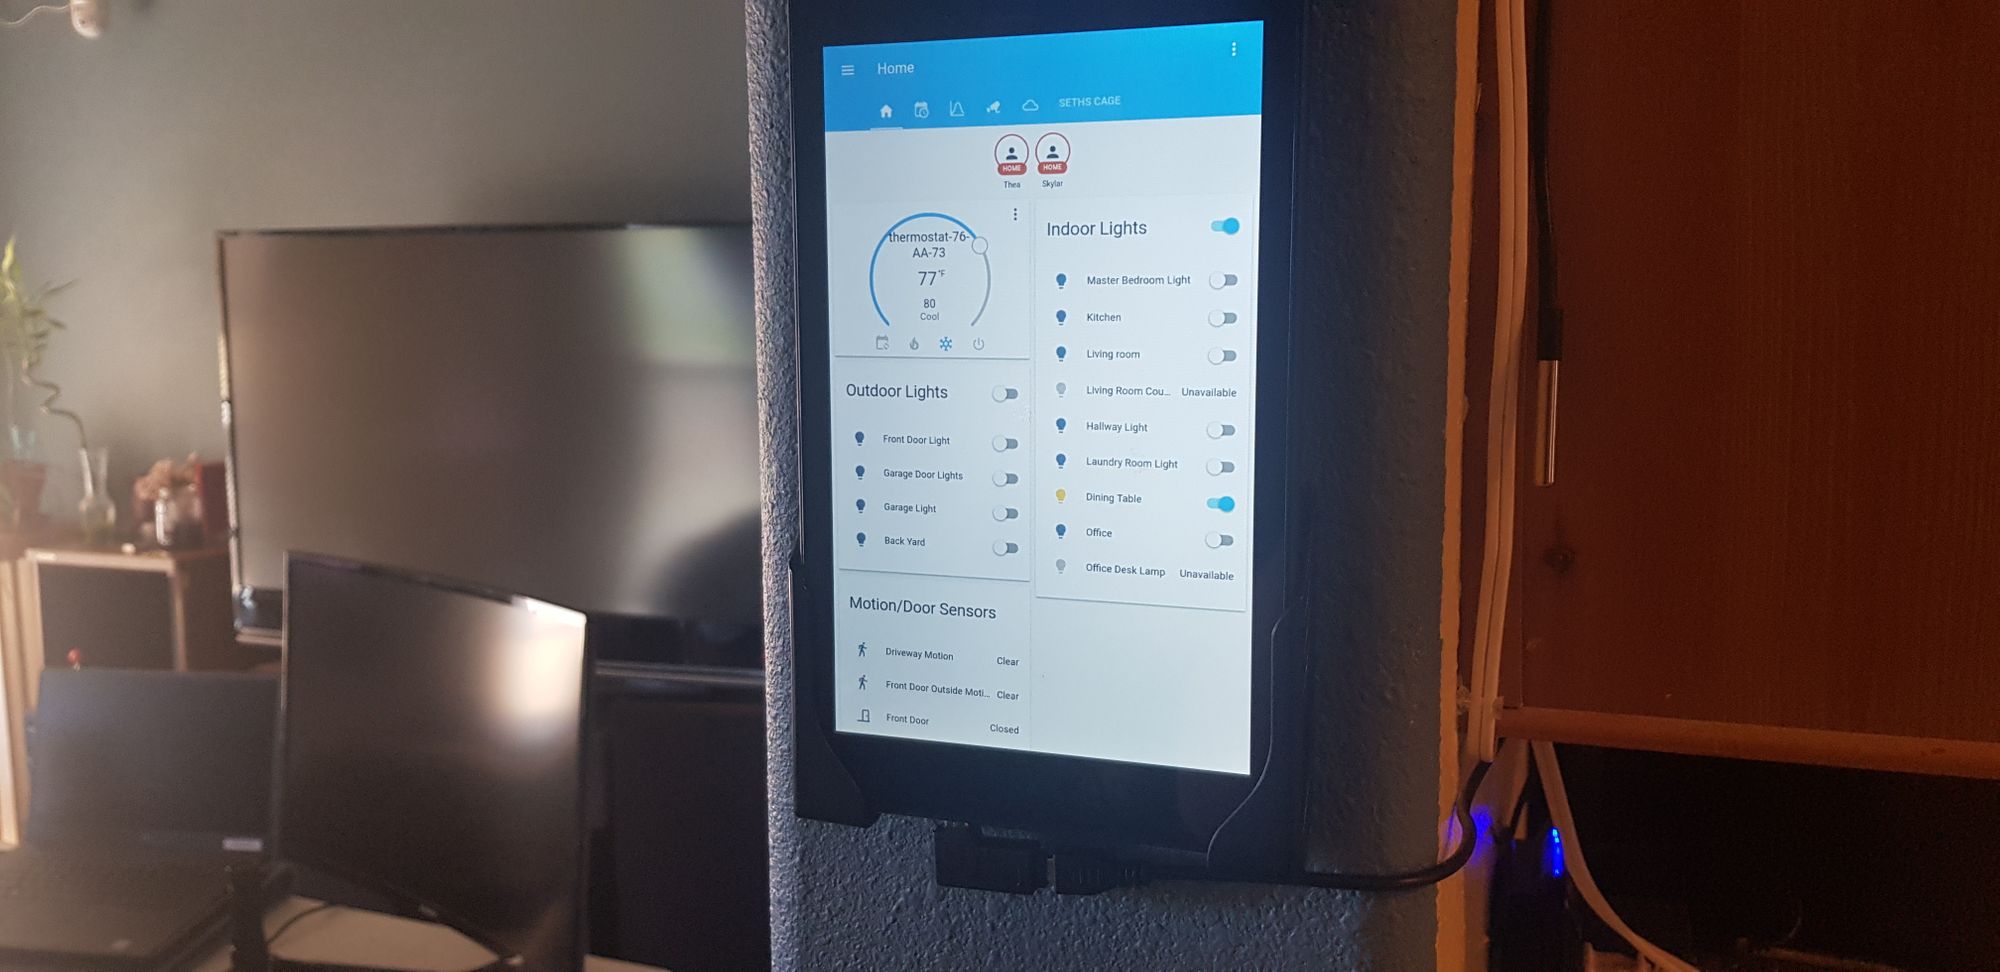 Wall mounted tablet running Home Assistant